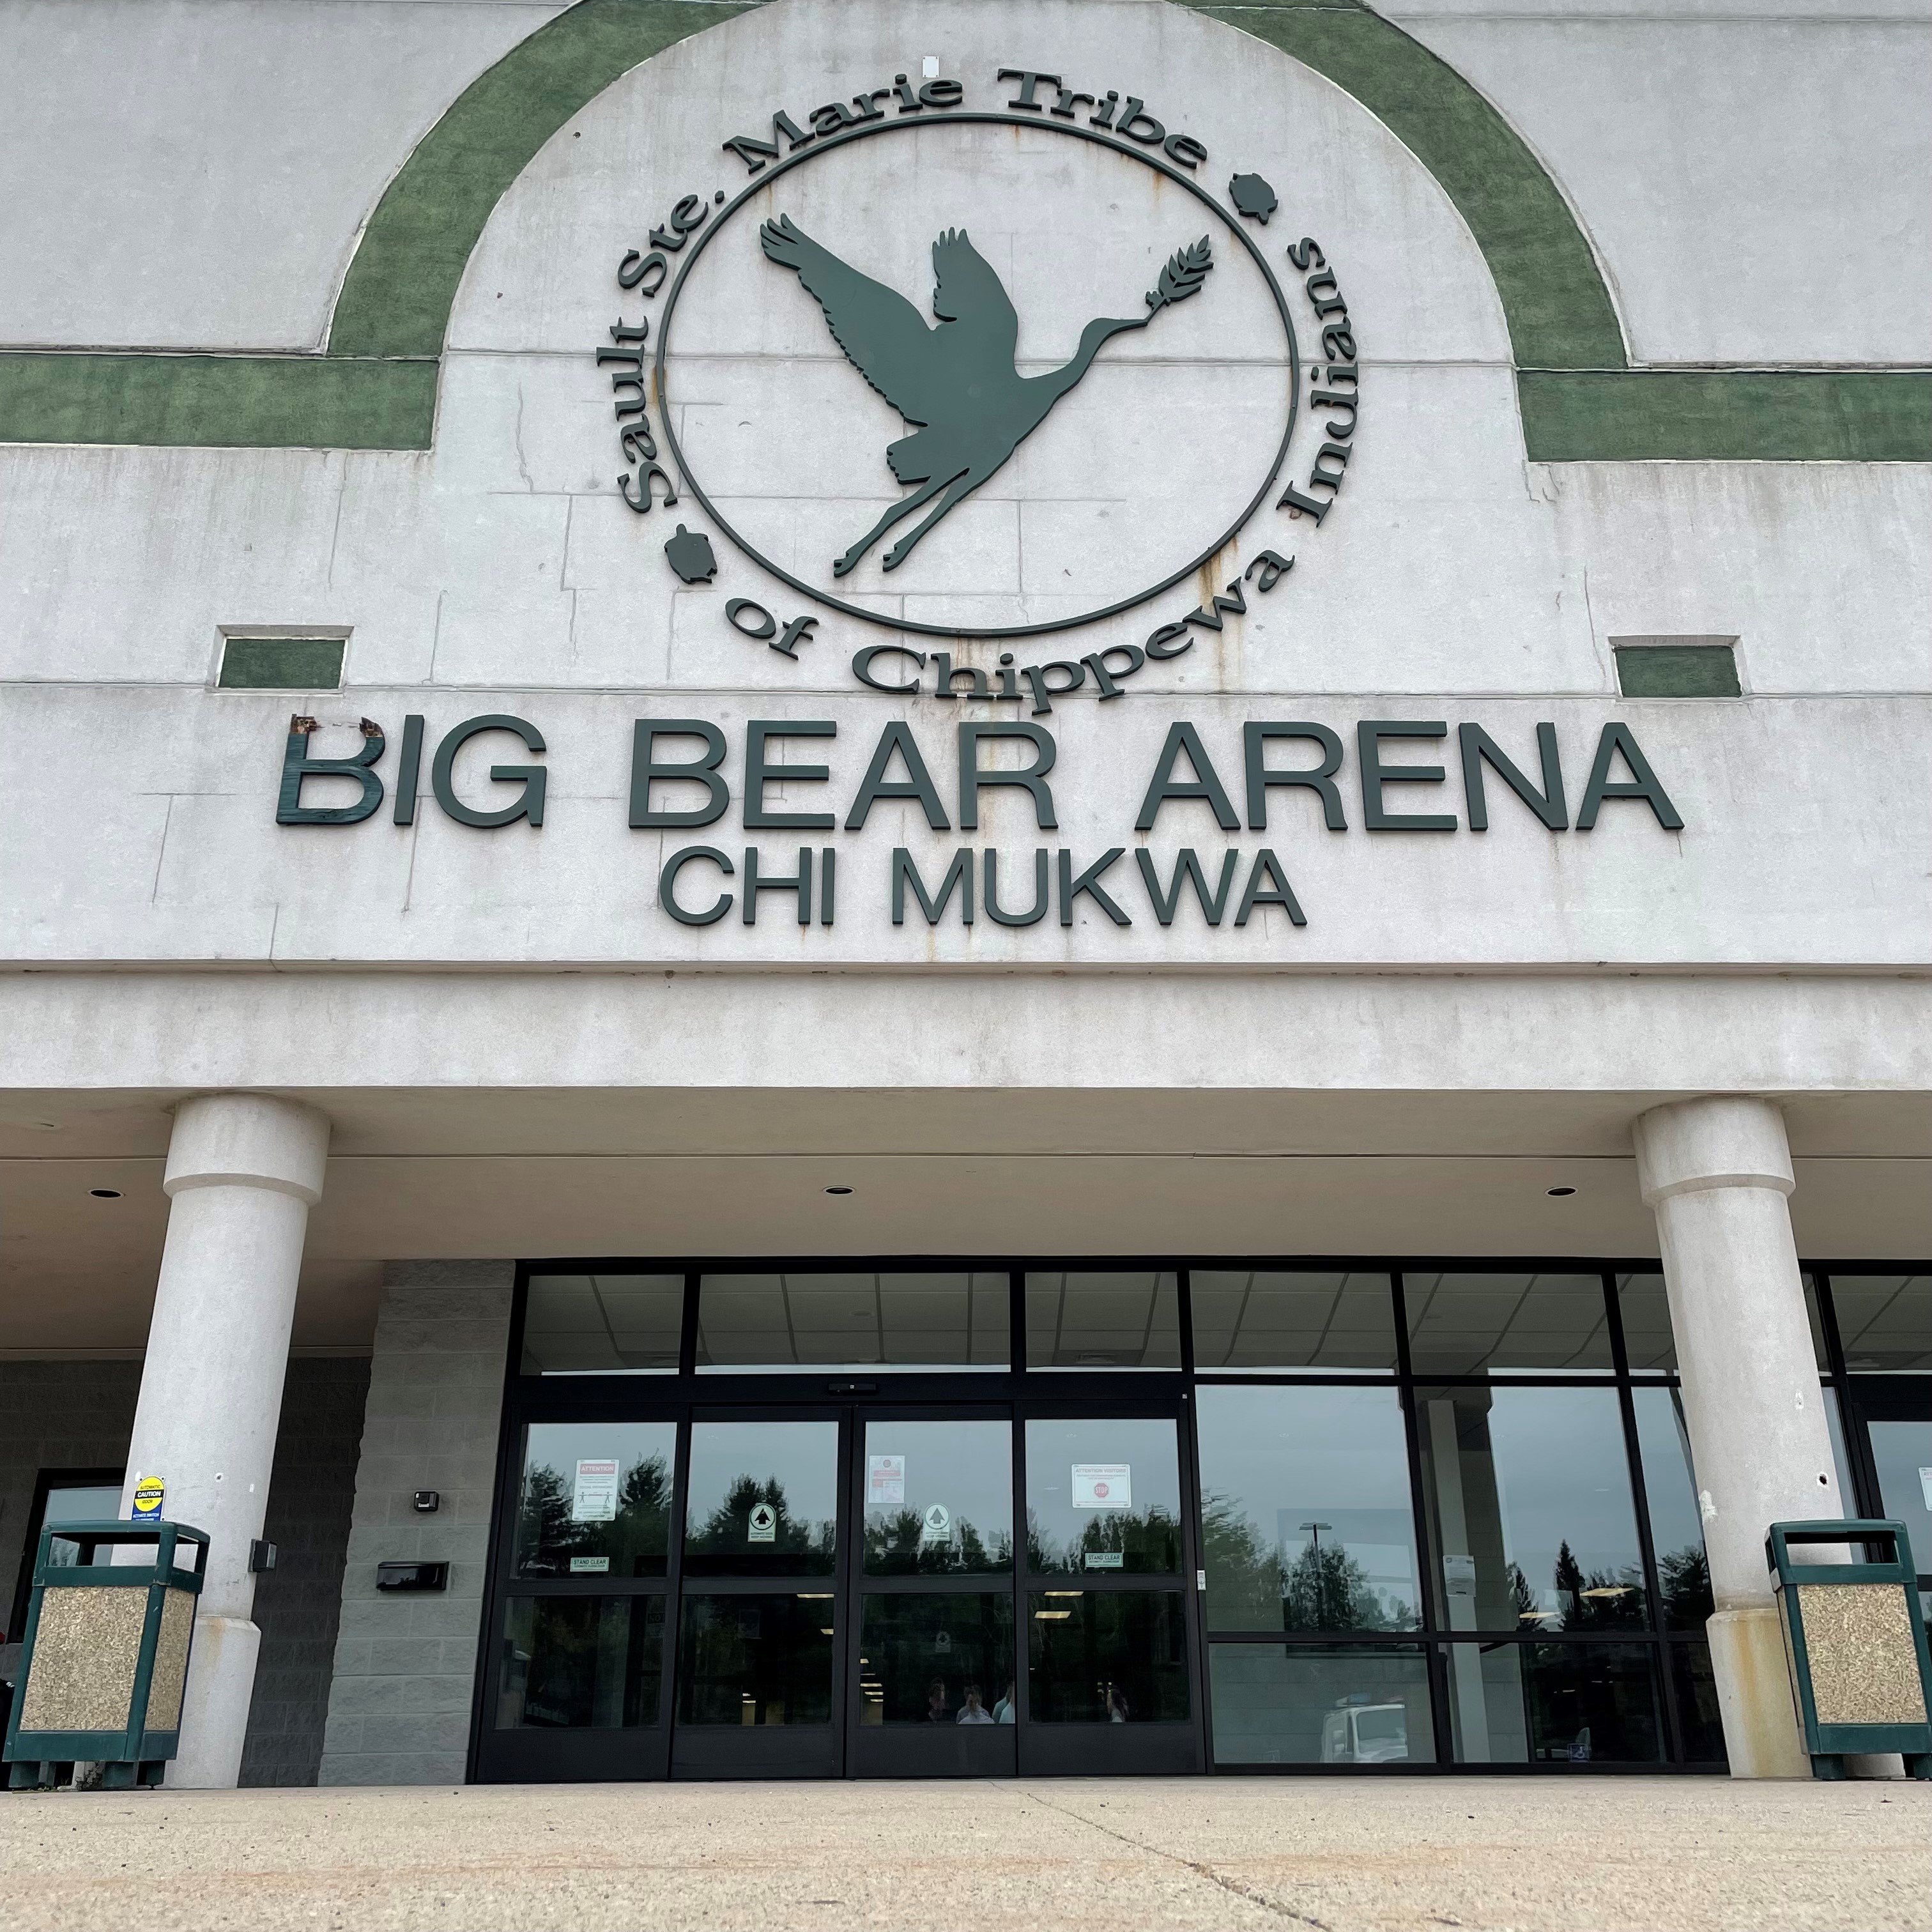 the big bear arena where I worked